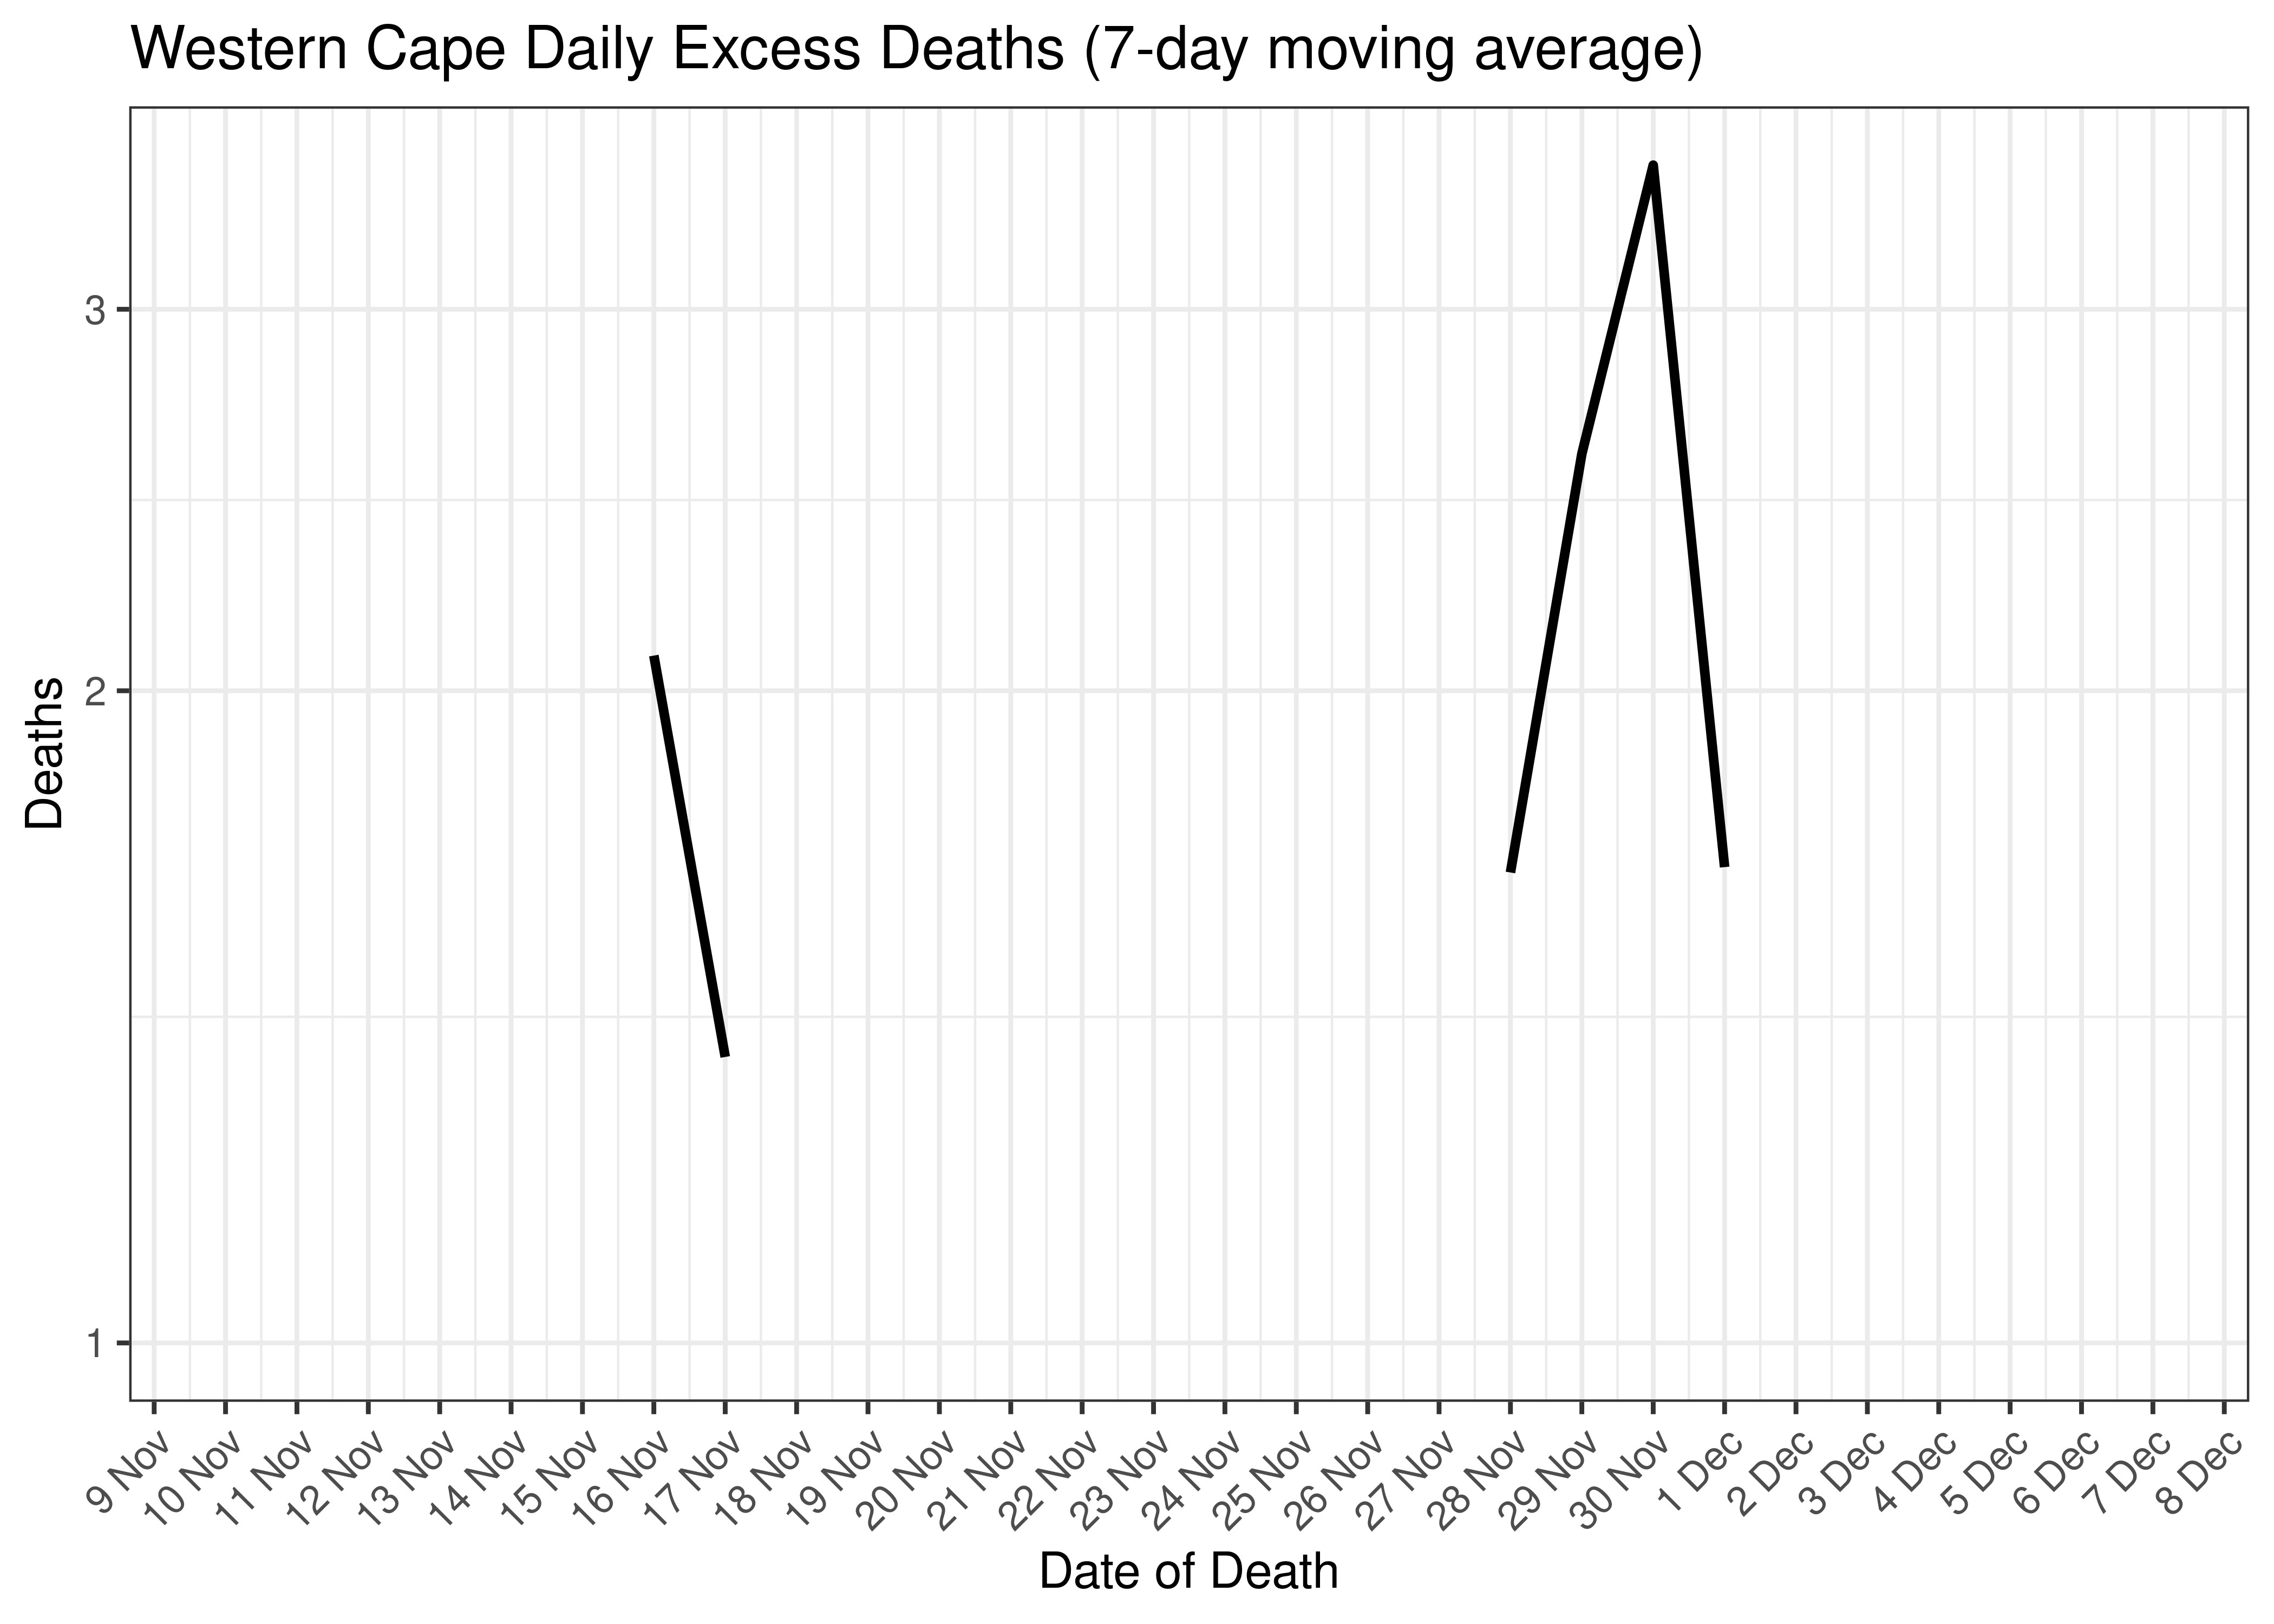 Western Cape Daily Excess Deaths for Last 30-days (7-day moving average)